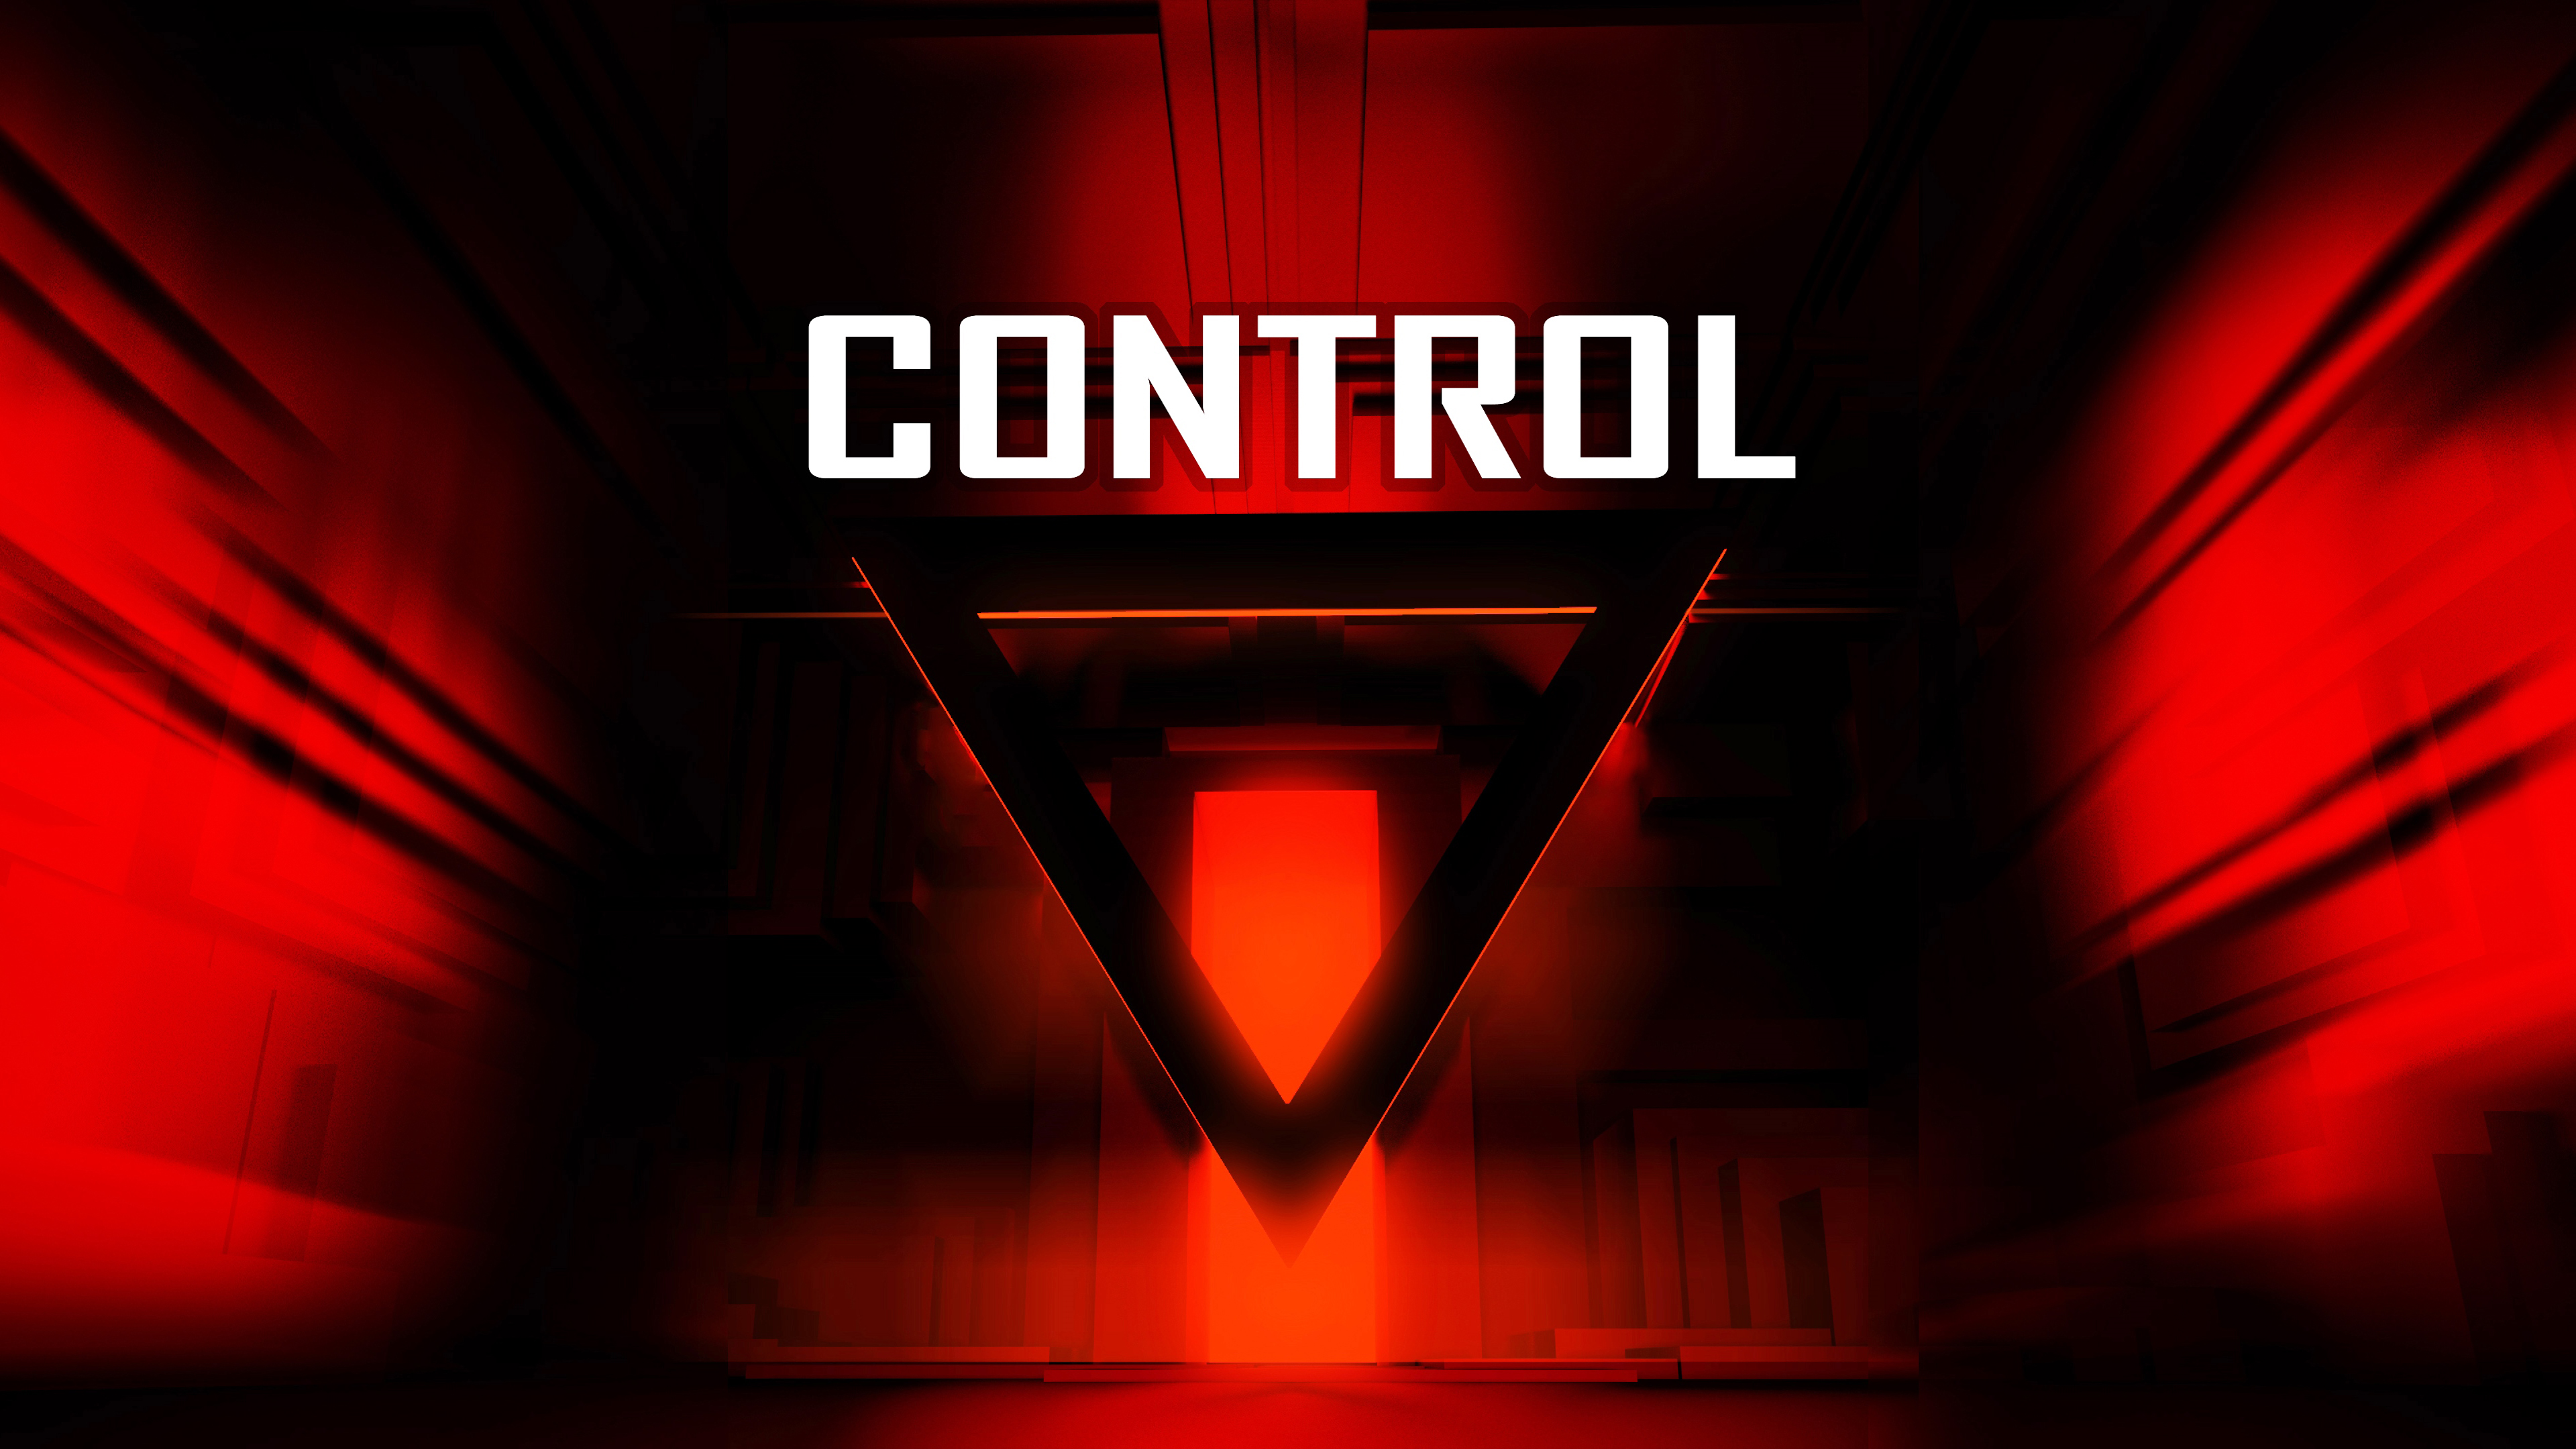 HD wallpaper control, video game, control (video game)